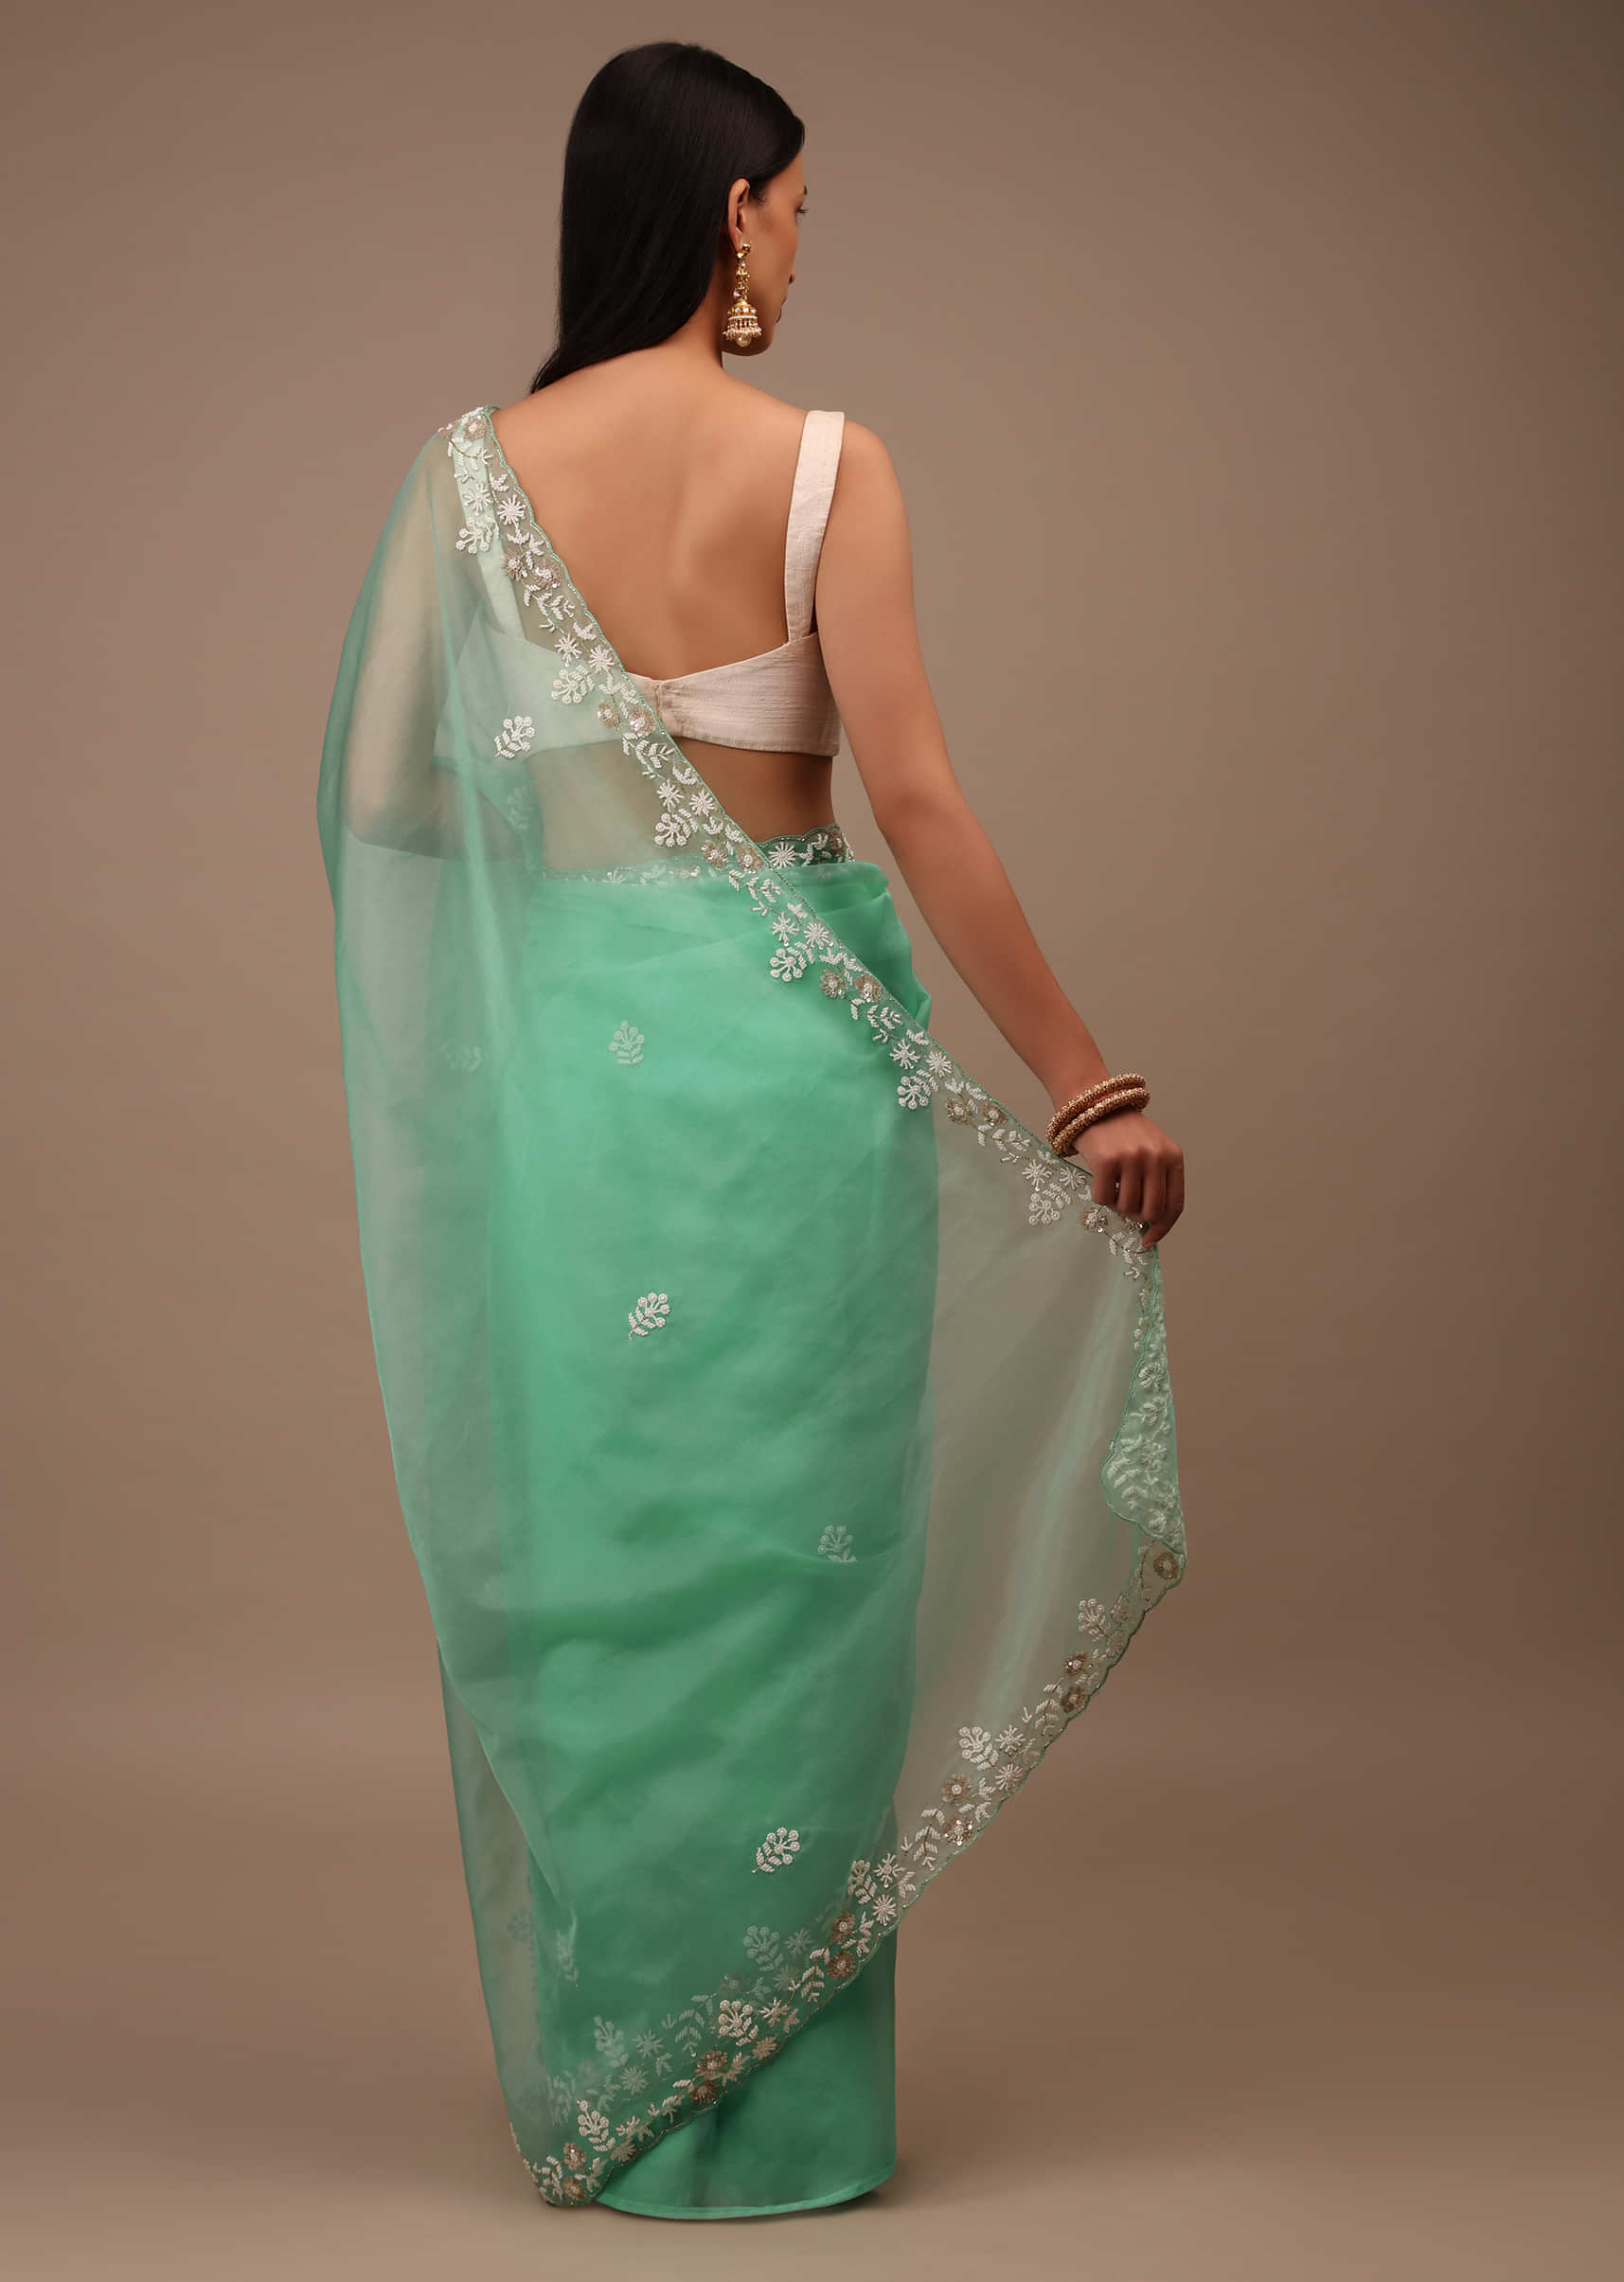 Sea Green Saree In Organza With Hand Embroidered Moti And Sequin Work On The Border And Butti Design